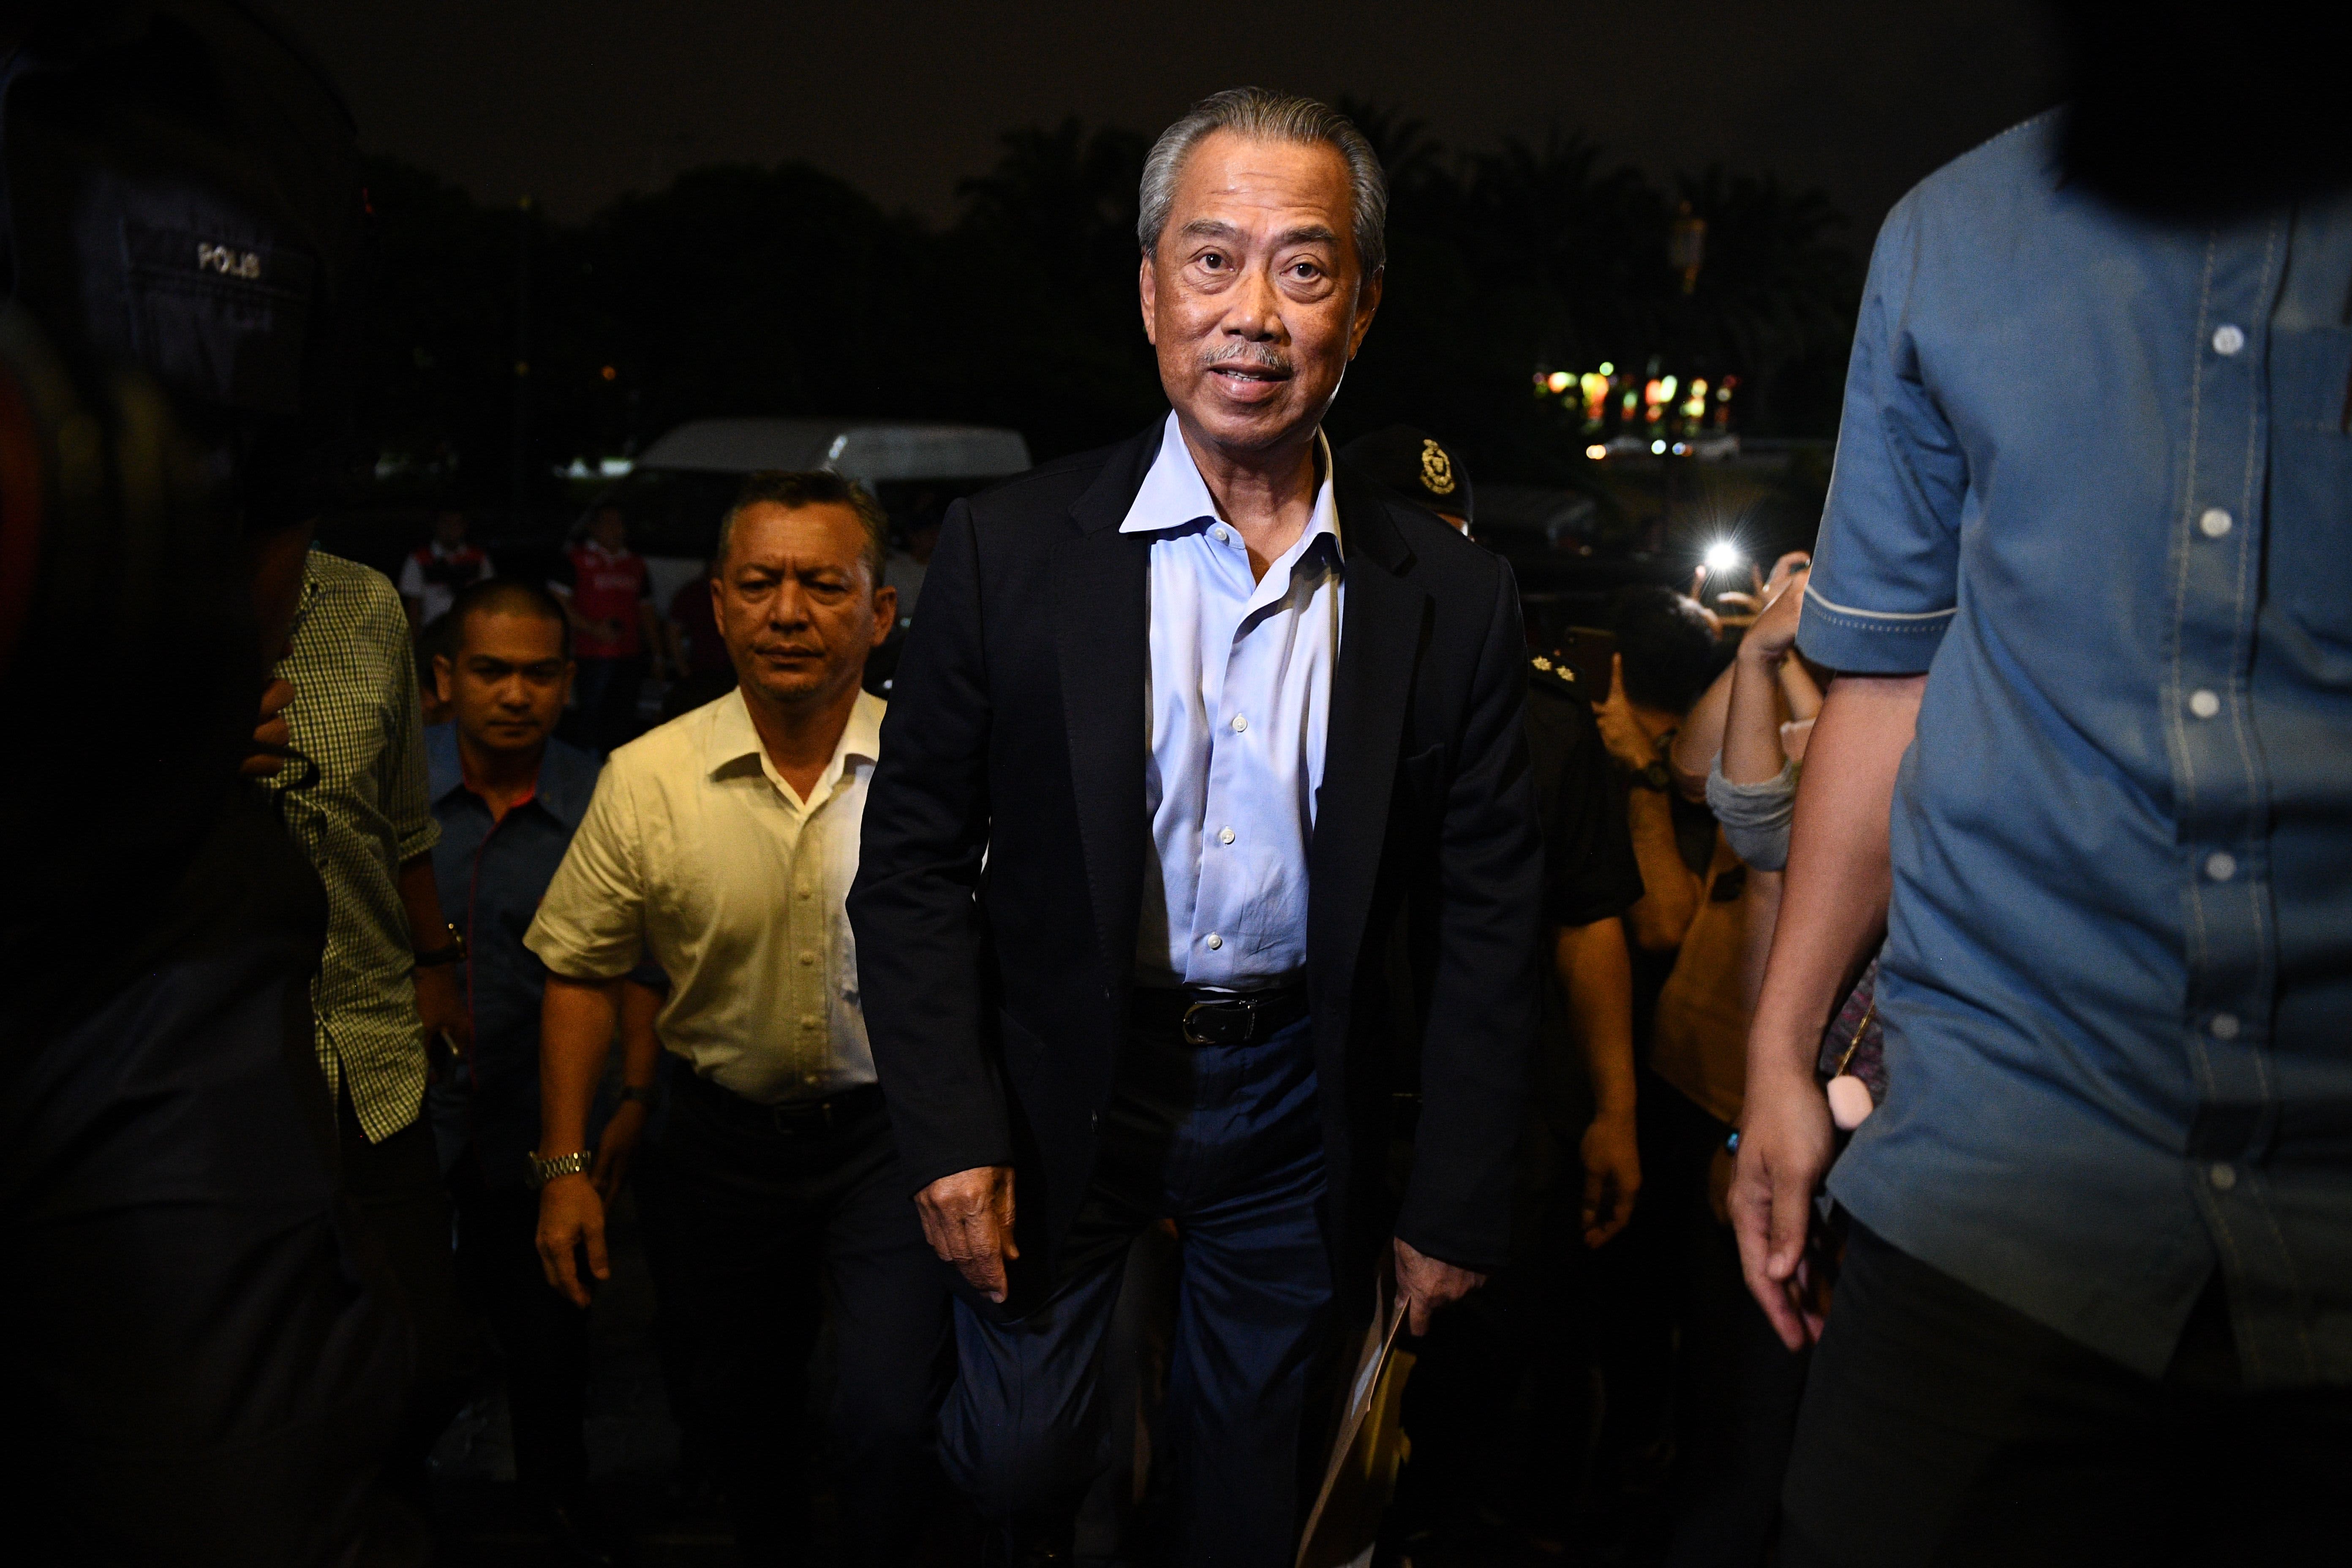 Cabinet of Malaysia’s Prime Minister Muhyiddin Yassin resigns, says minister